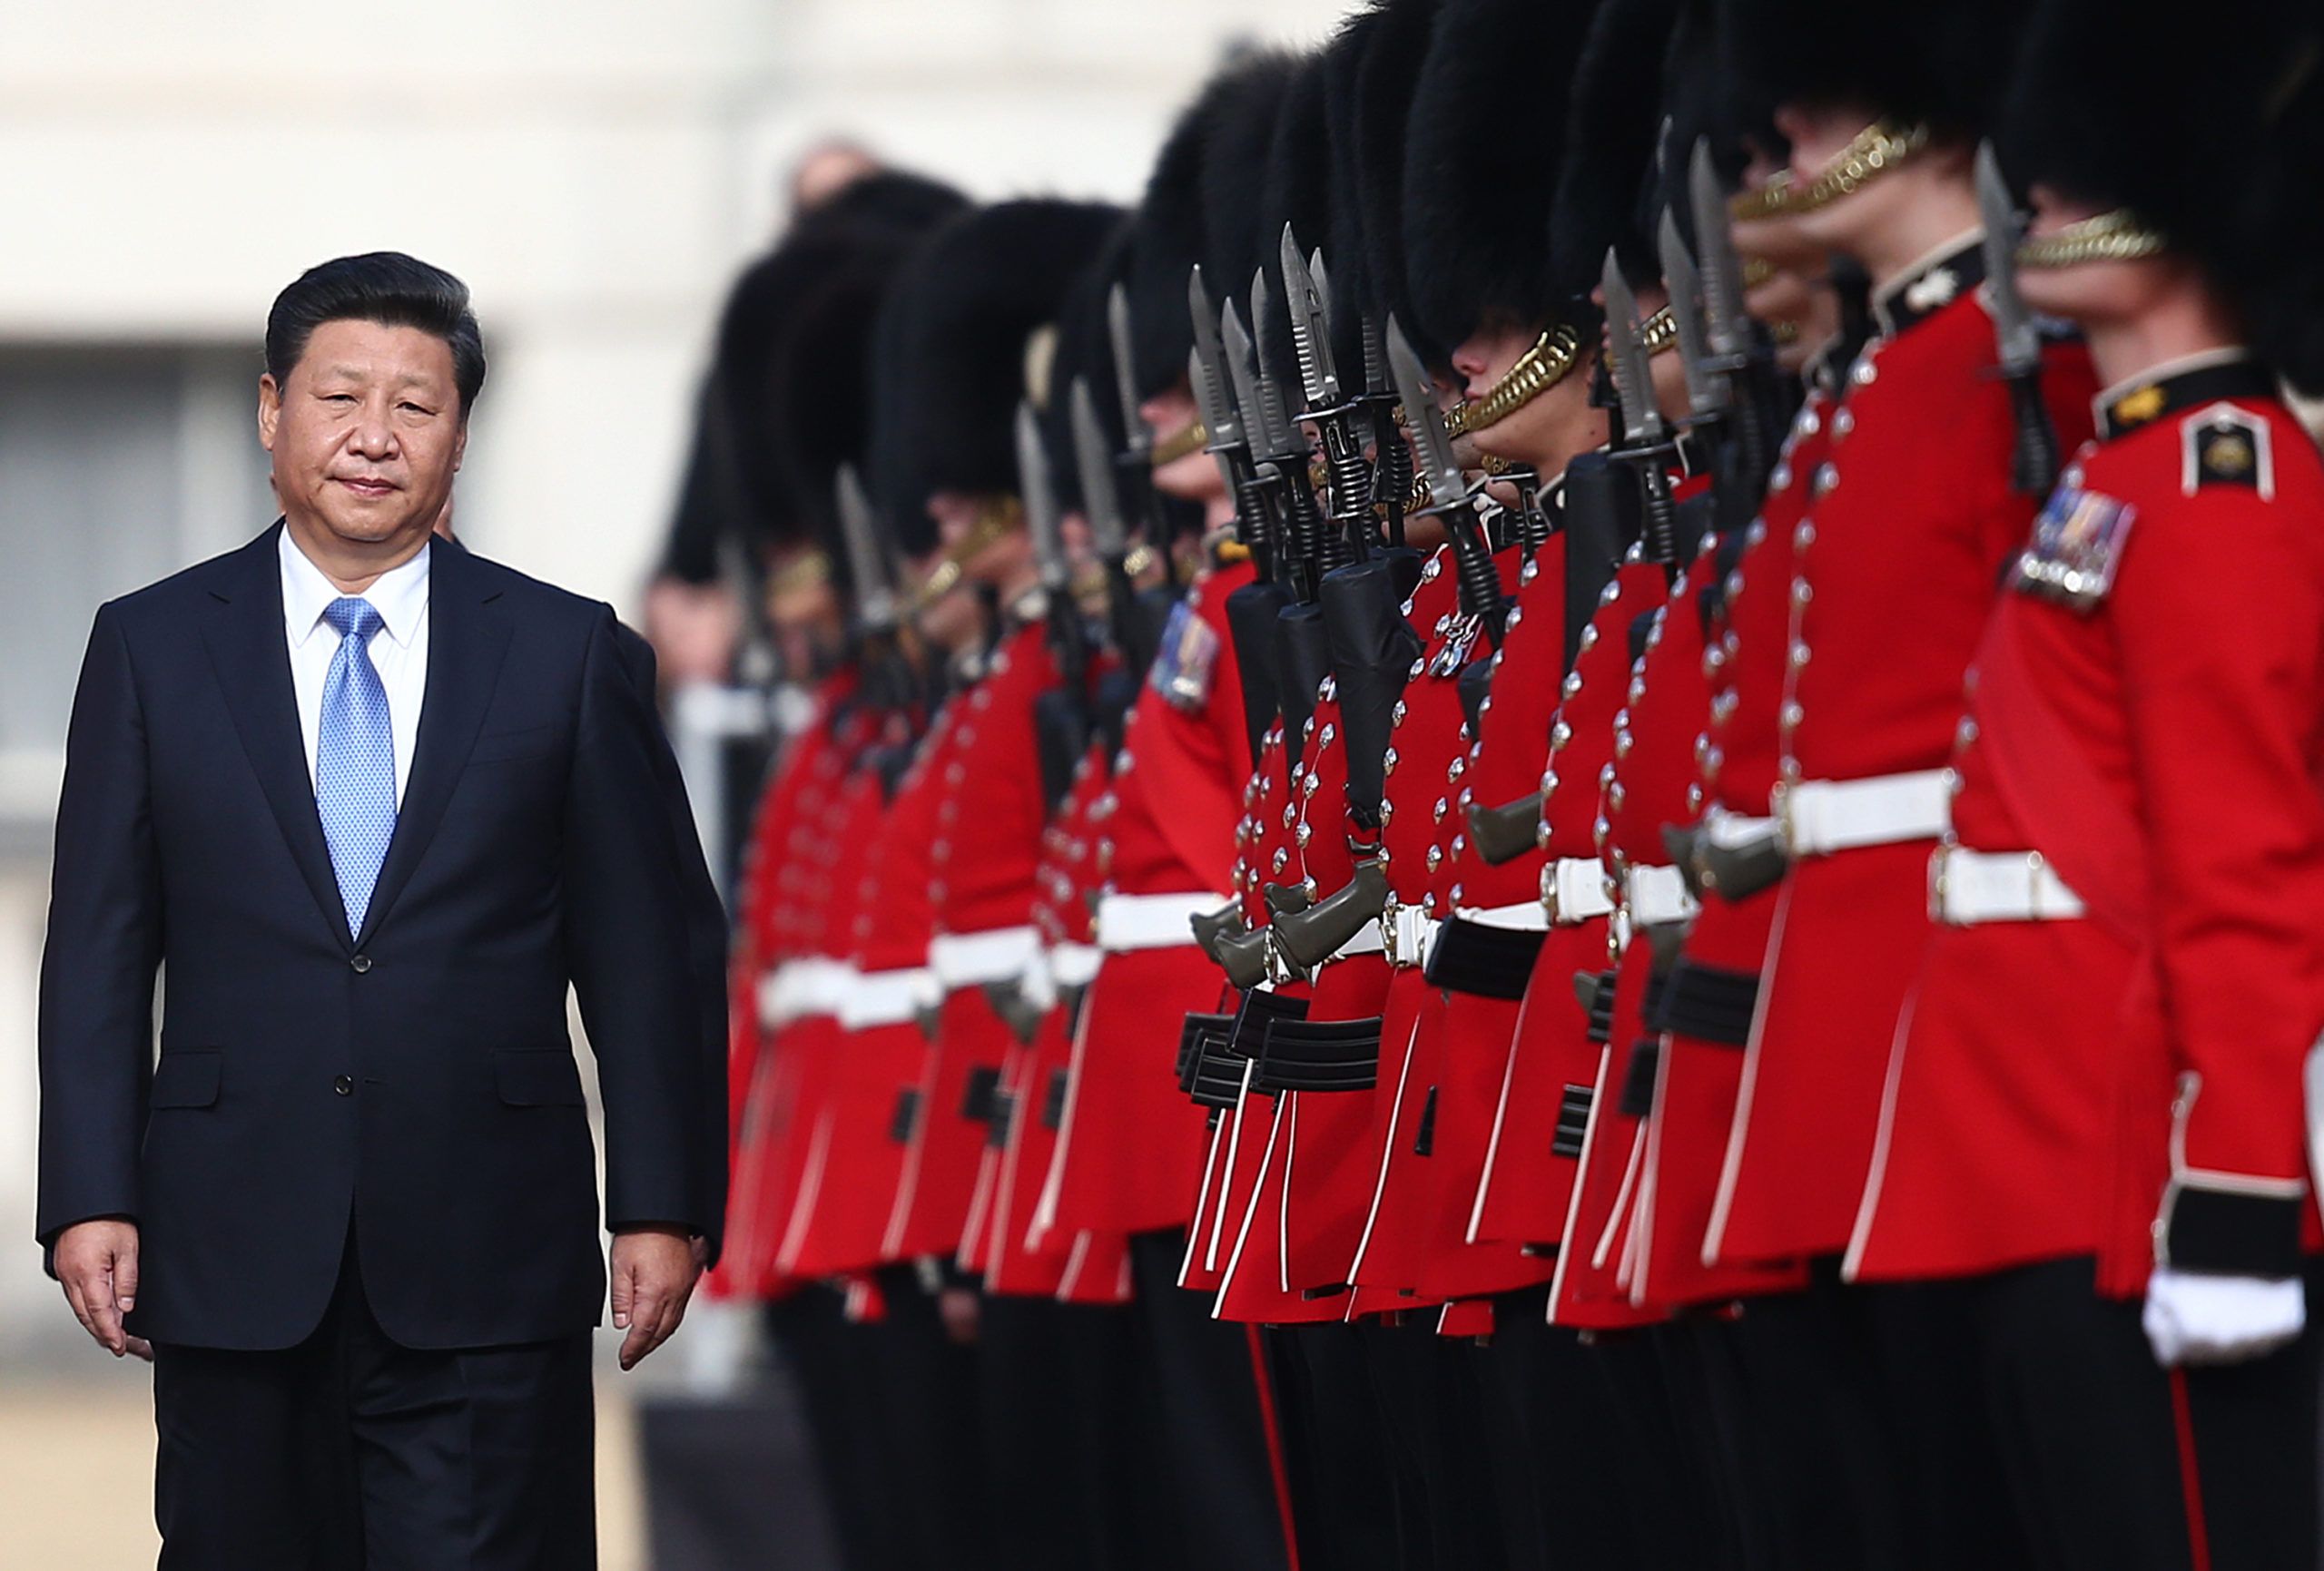 China's President, Xi Jinping, accompanied by Prince Philip (behind, not pictured) reviews an honour guard on October 20, 2015 in London, England. (Photo by Carl Court/Getty Images)